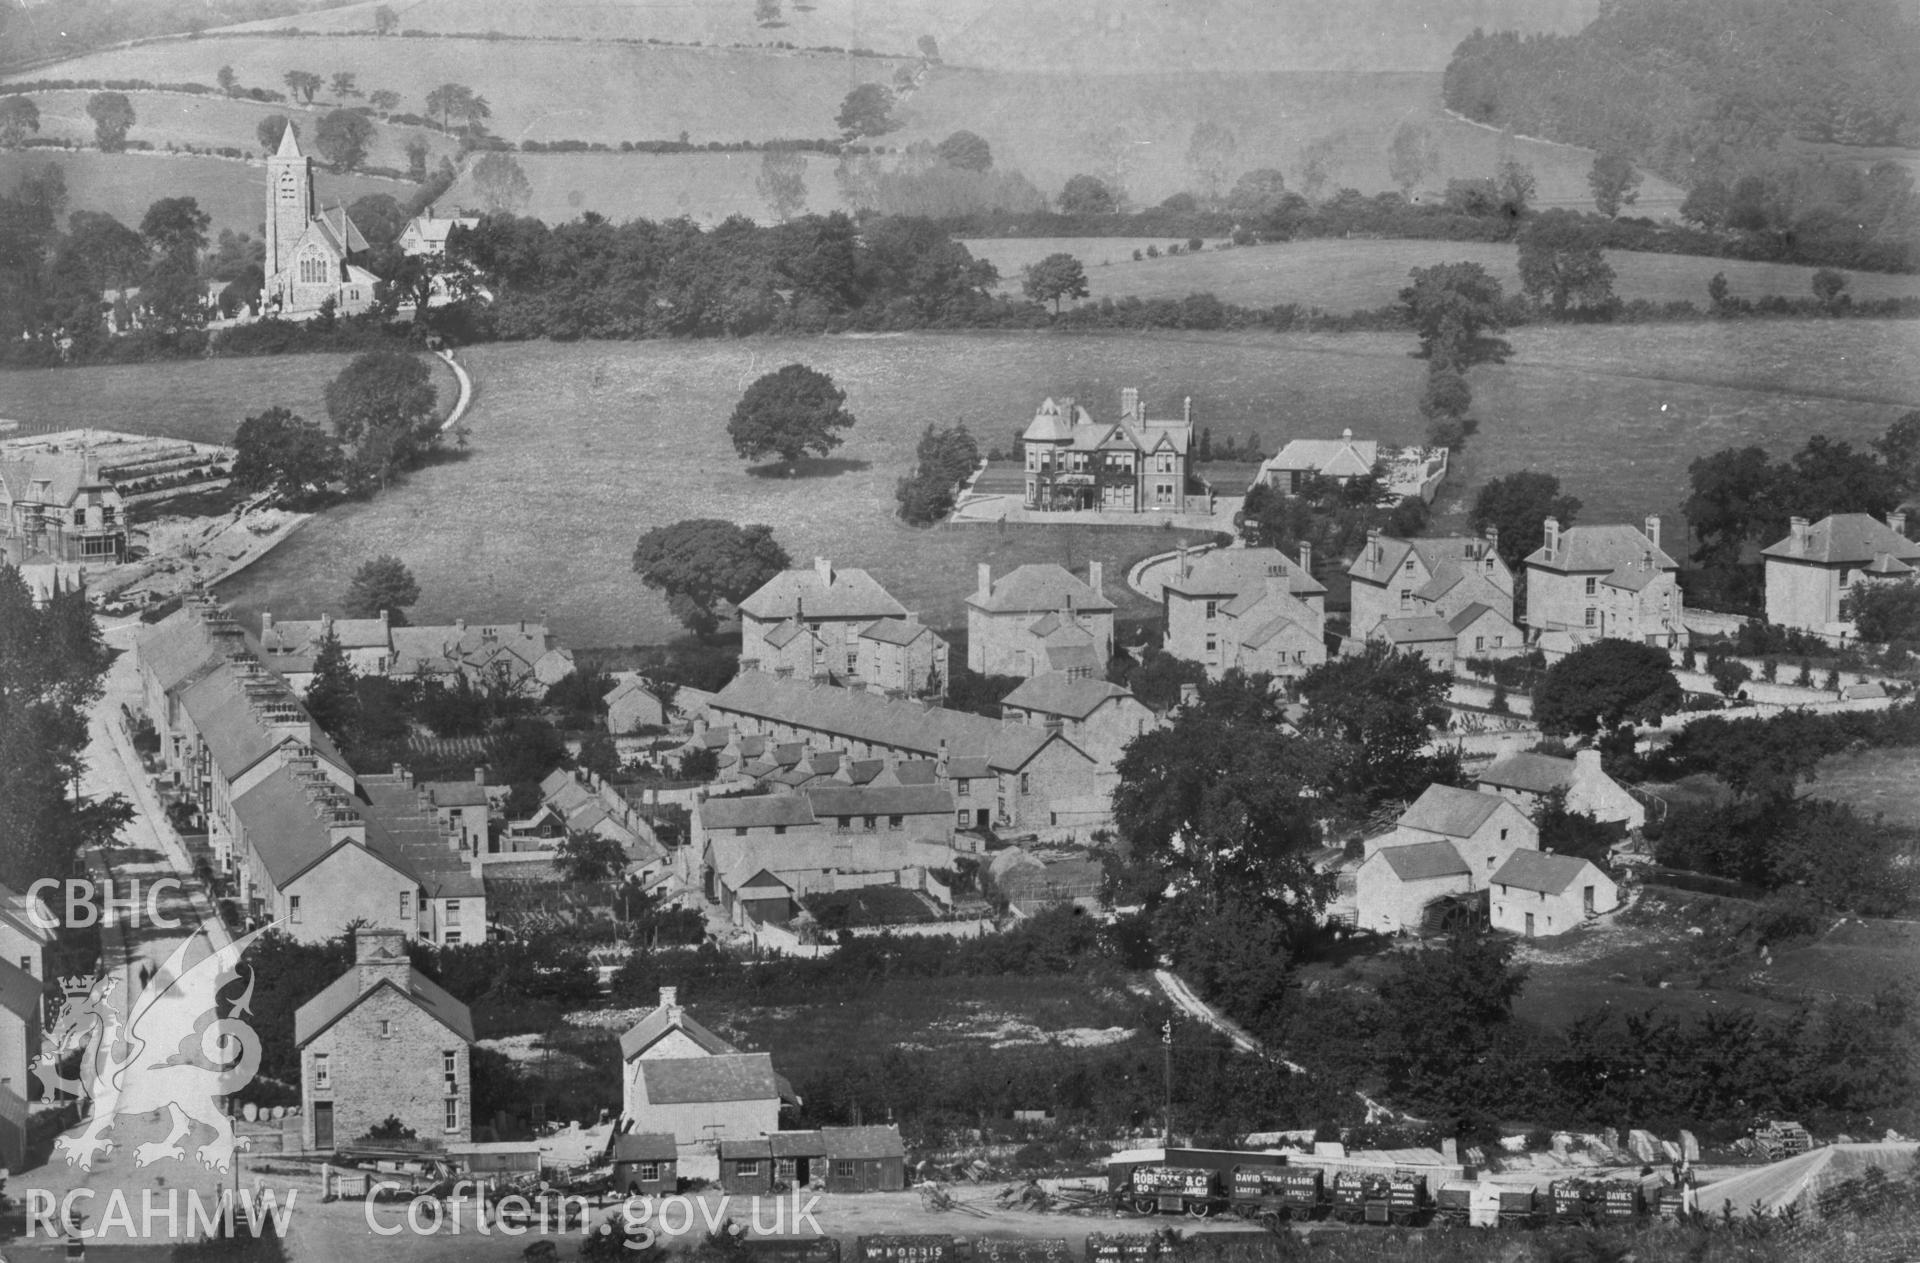 Digital copy of a view of Lampeter.